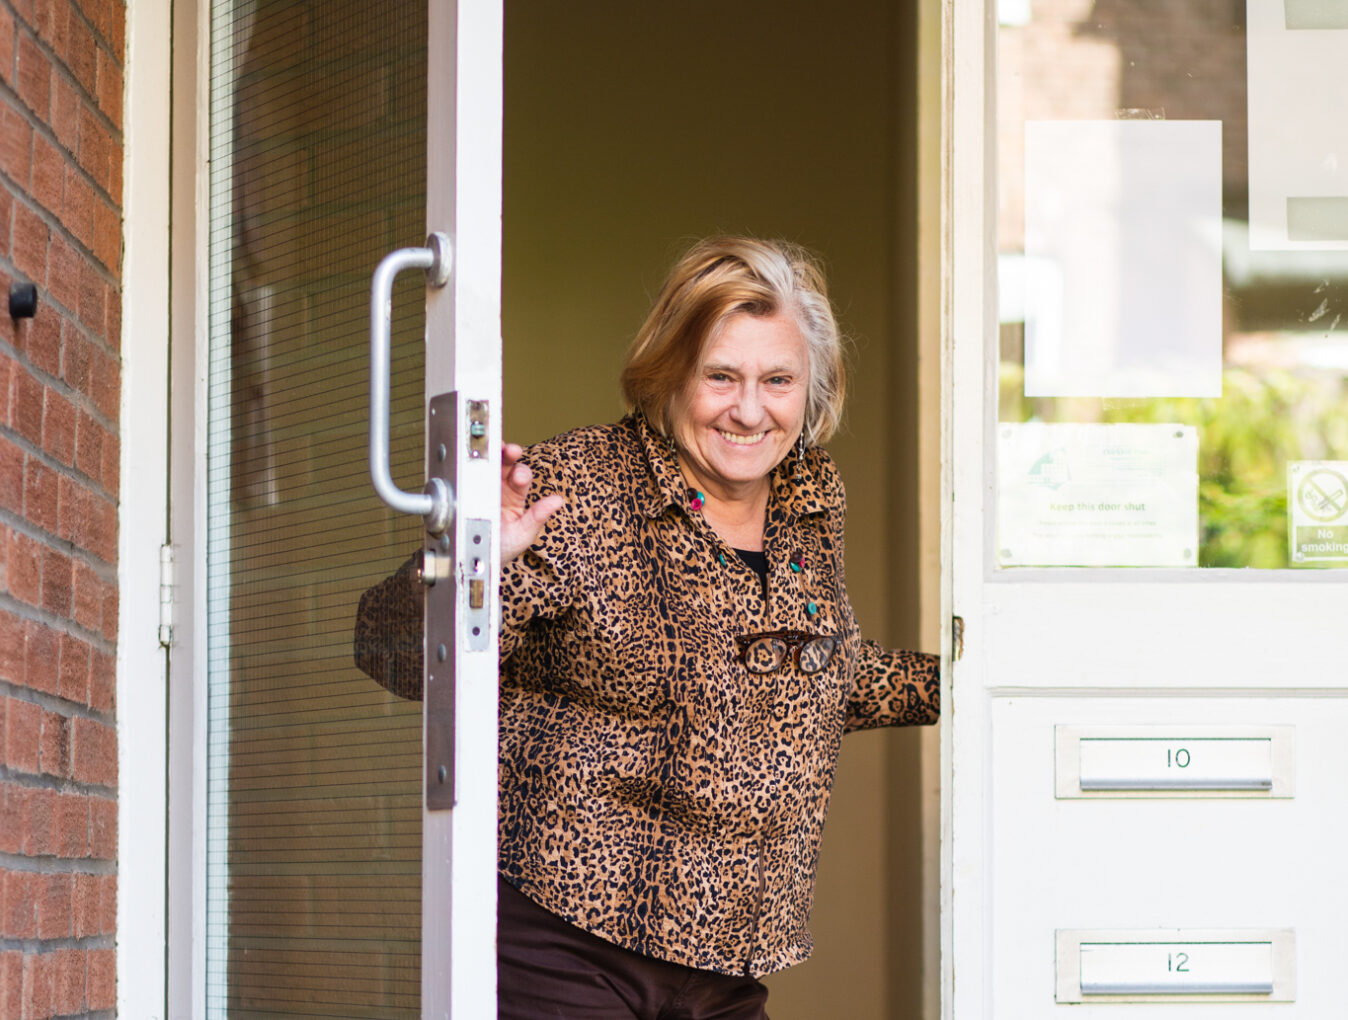 A person wearing a leopard print shirt stand in an open doorway, smiling as though in greeting. To the right of the doorframe, four letterboxes are built into the wall.